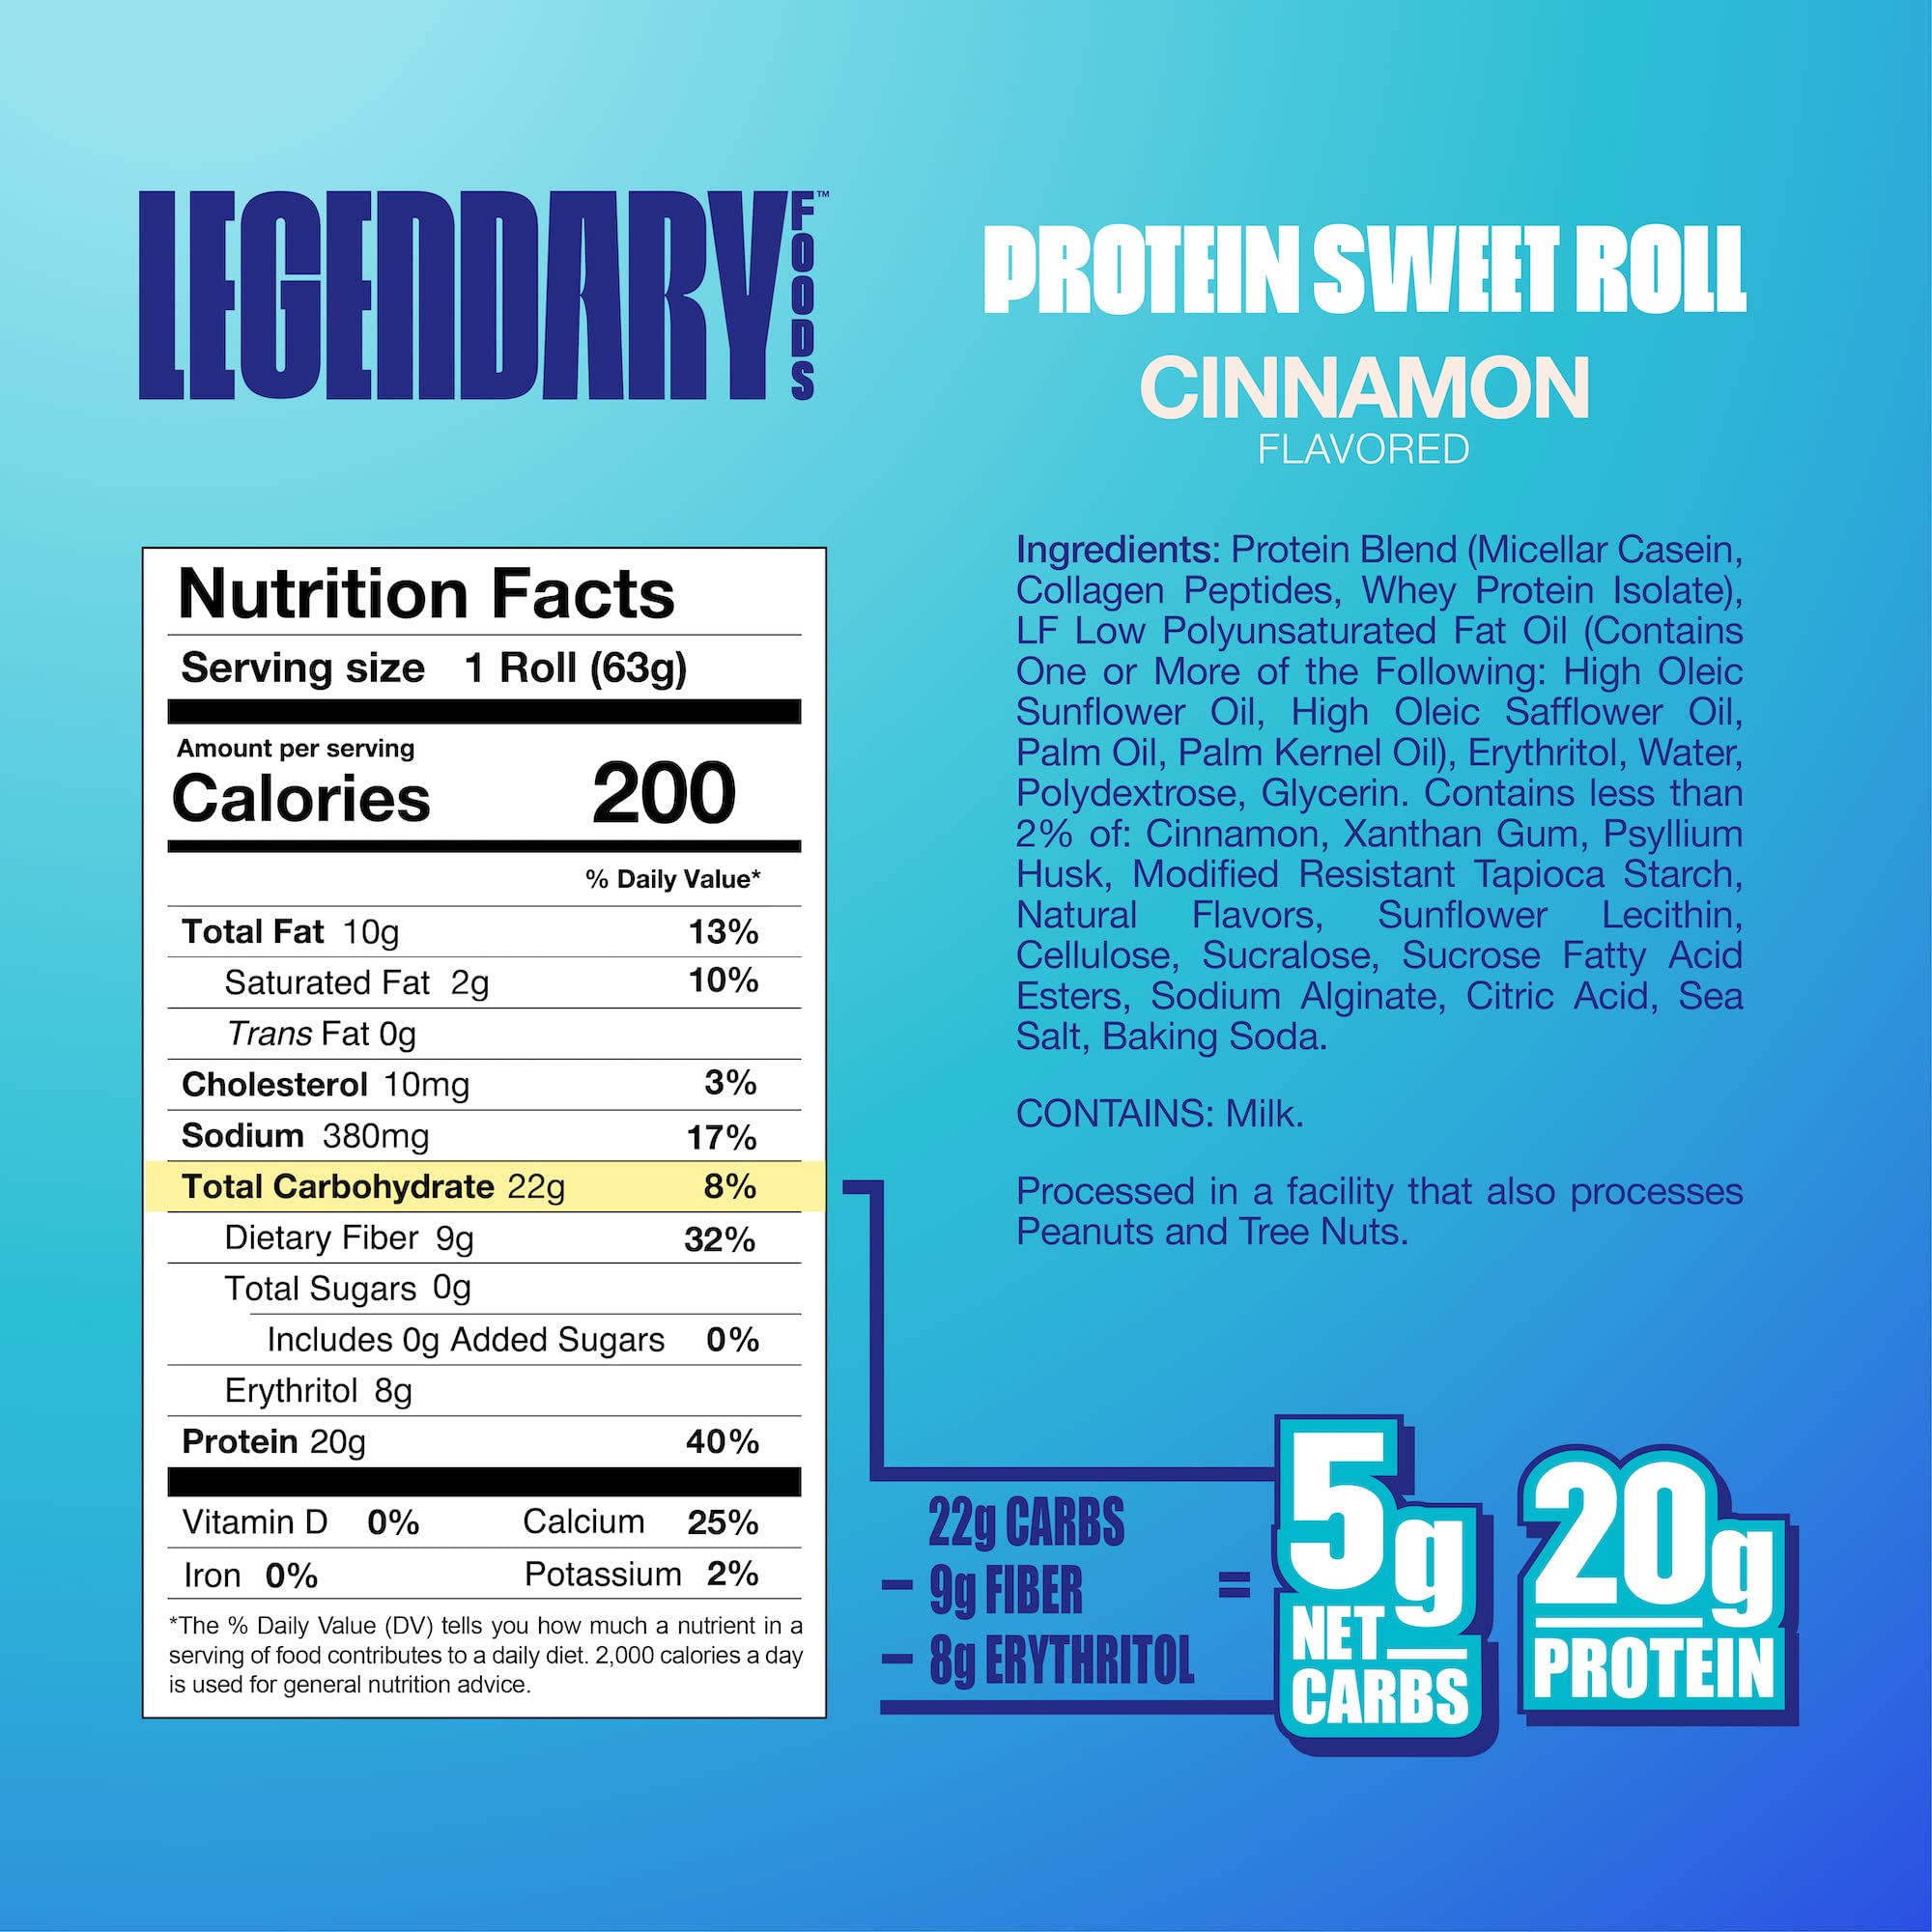 Legendary Foods High Protein Snack Cinnamon Sweet Roll | 20 Gr Pure Protein Bar Alternative | Low Carb Food | Low Sugar and Gluten Free Keto Breakfast Snacks | Healthy Cinnamon Flavored Rolls (10-pack)